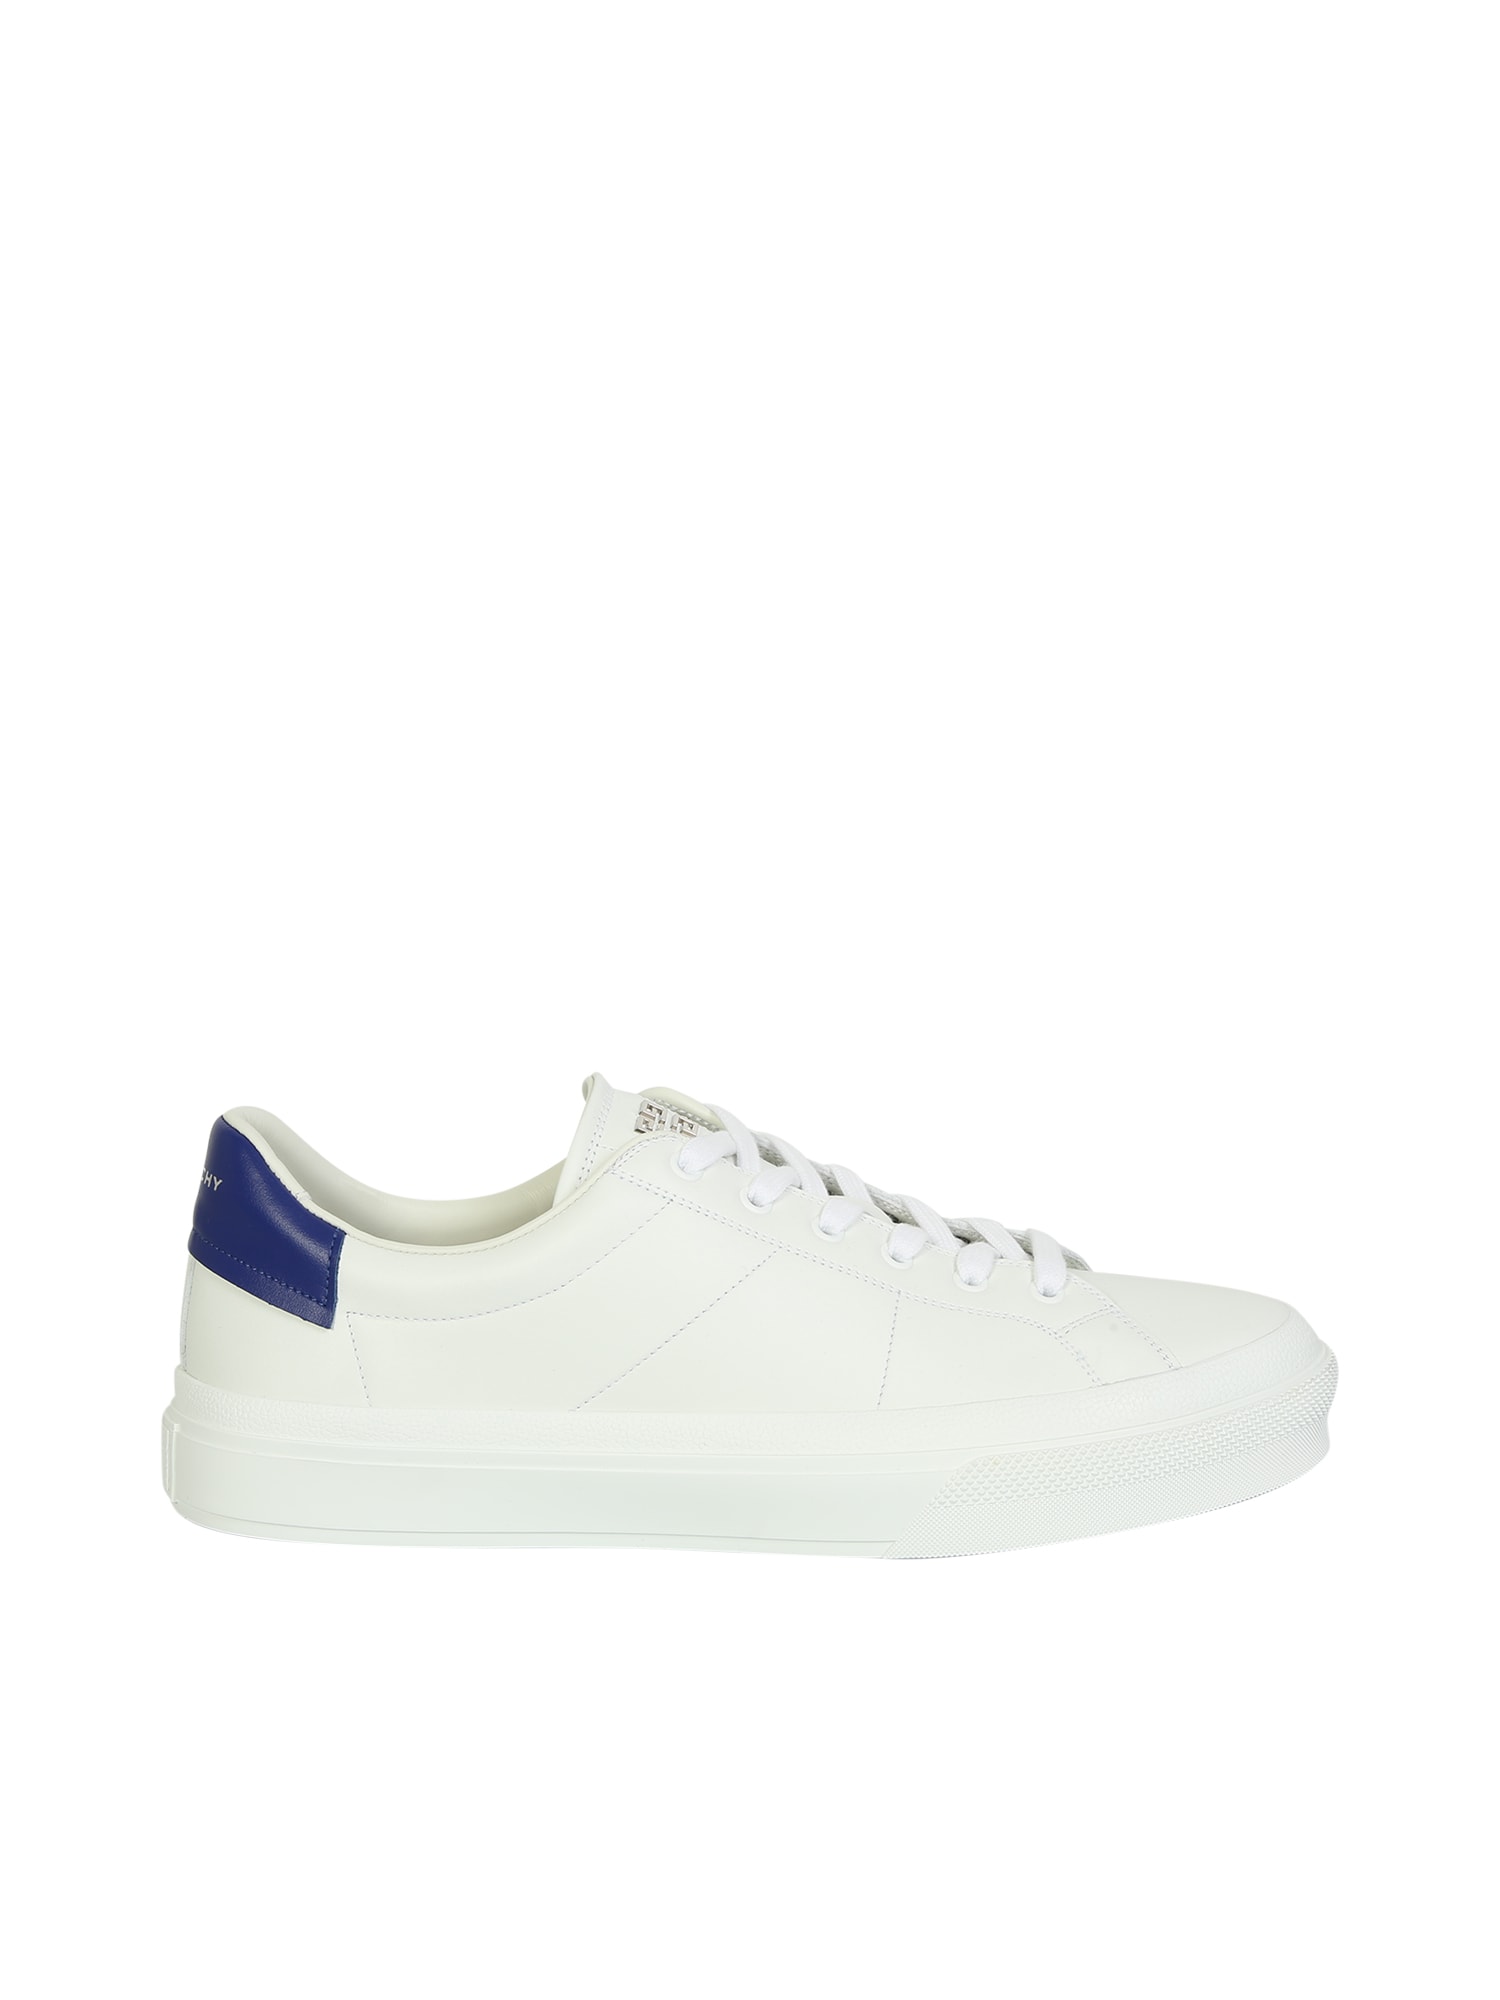 Givenchy City Court Sneakers By Are A Model That Characterizes The New Collection As They Are Inspired By The Tennis Court